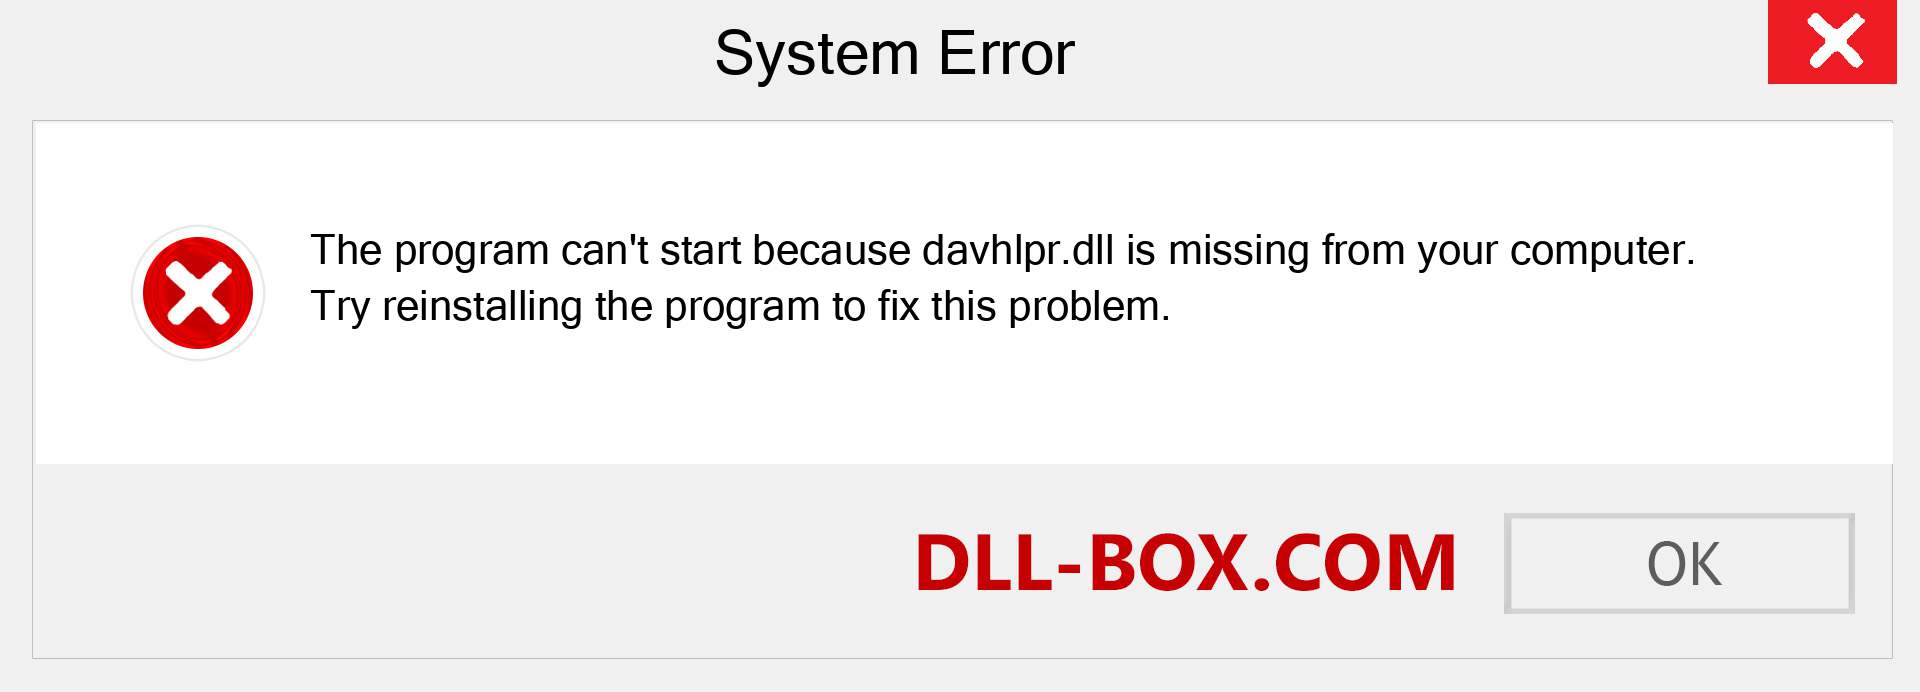  davhlpr.dll file is missing?. Download for Windows 7, 8, 10 - Fix  davhlpr dll Missing Error on Windows, photos, images